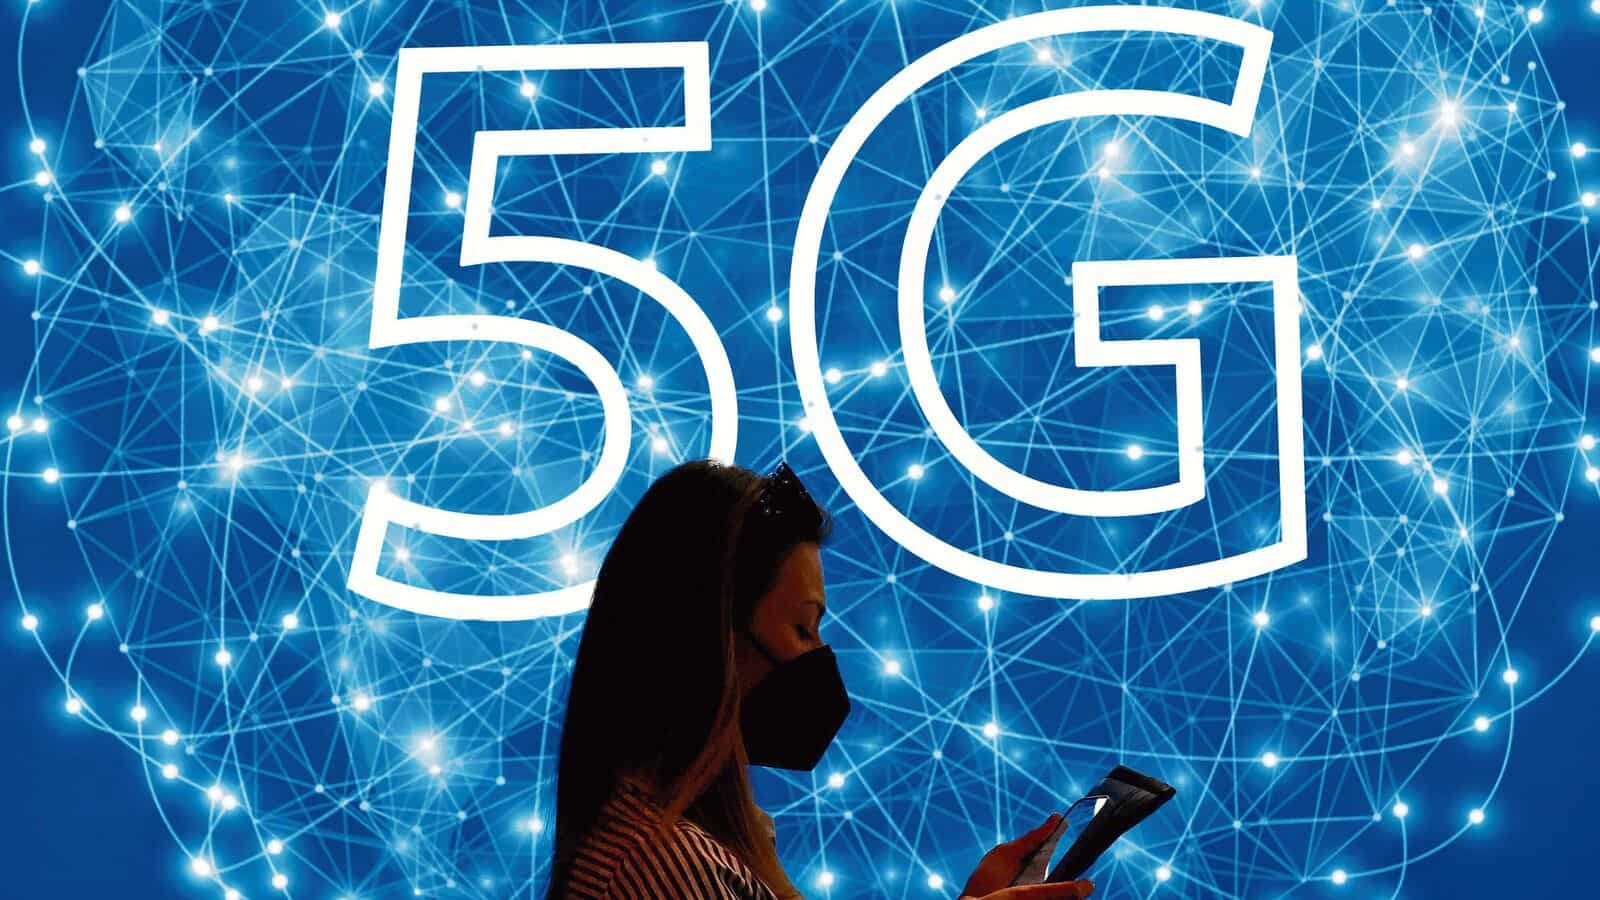 PM Modi To Launch 5G Services In First Week Of October